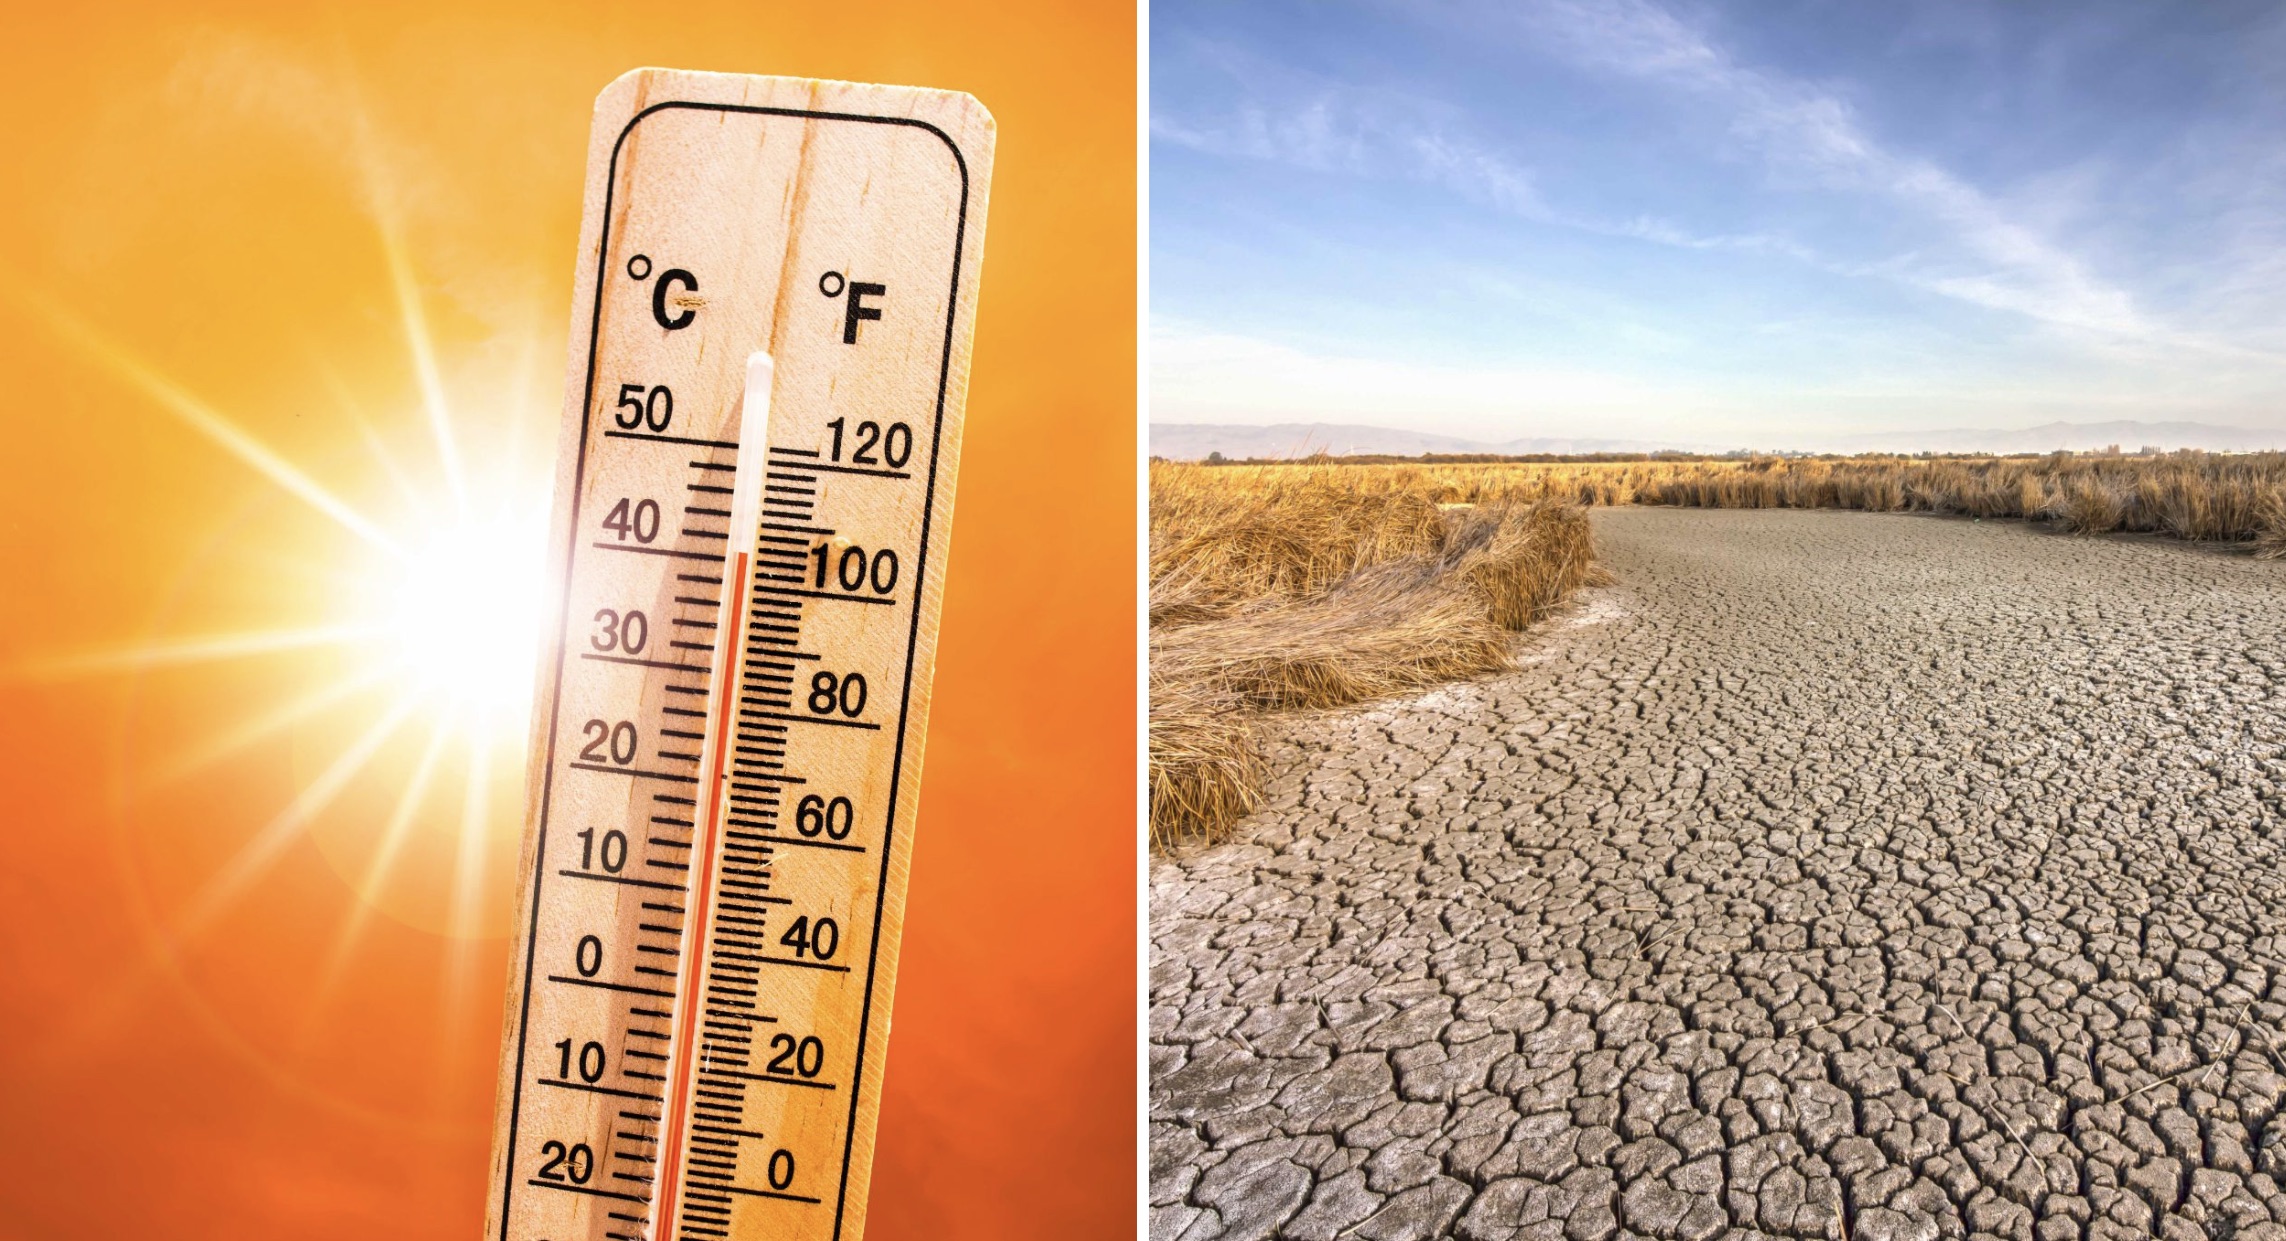 A thermometer showing temperatures over 100 degrees Fahrenheit alongside a dry landscape with cracked soil